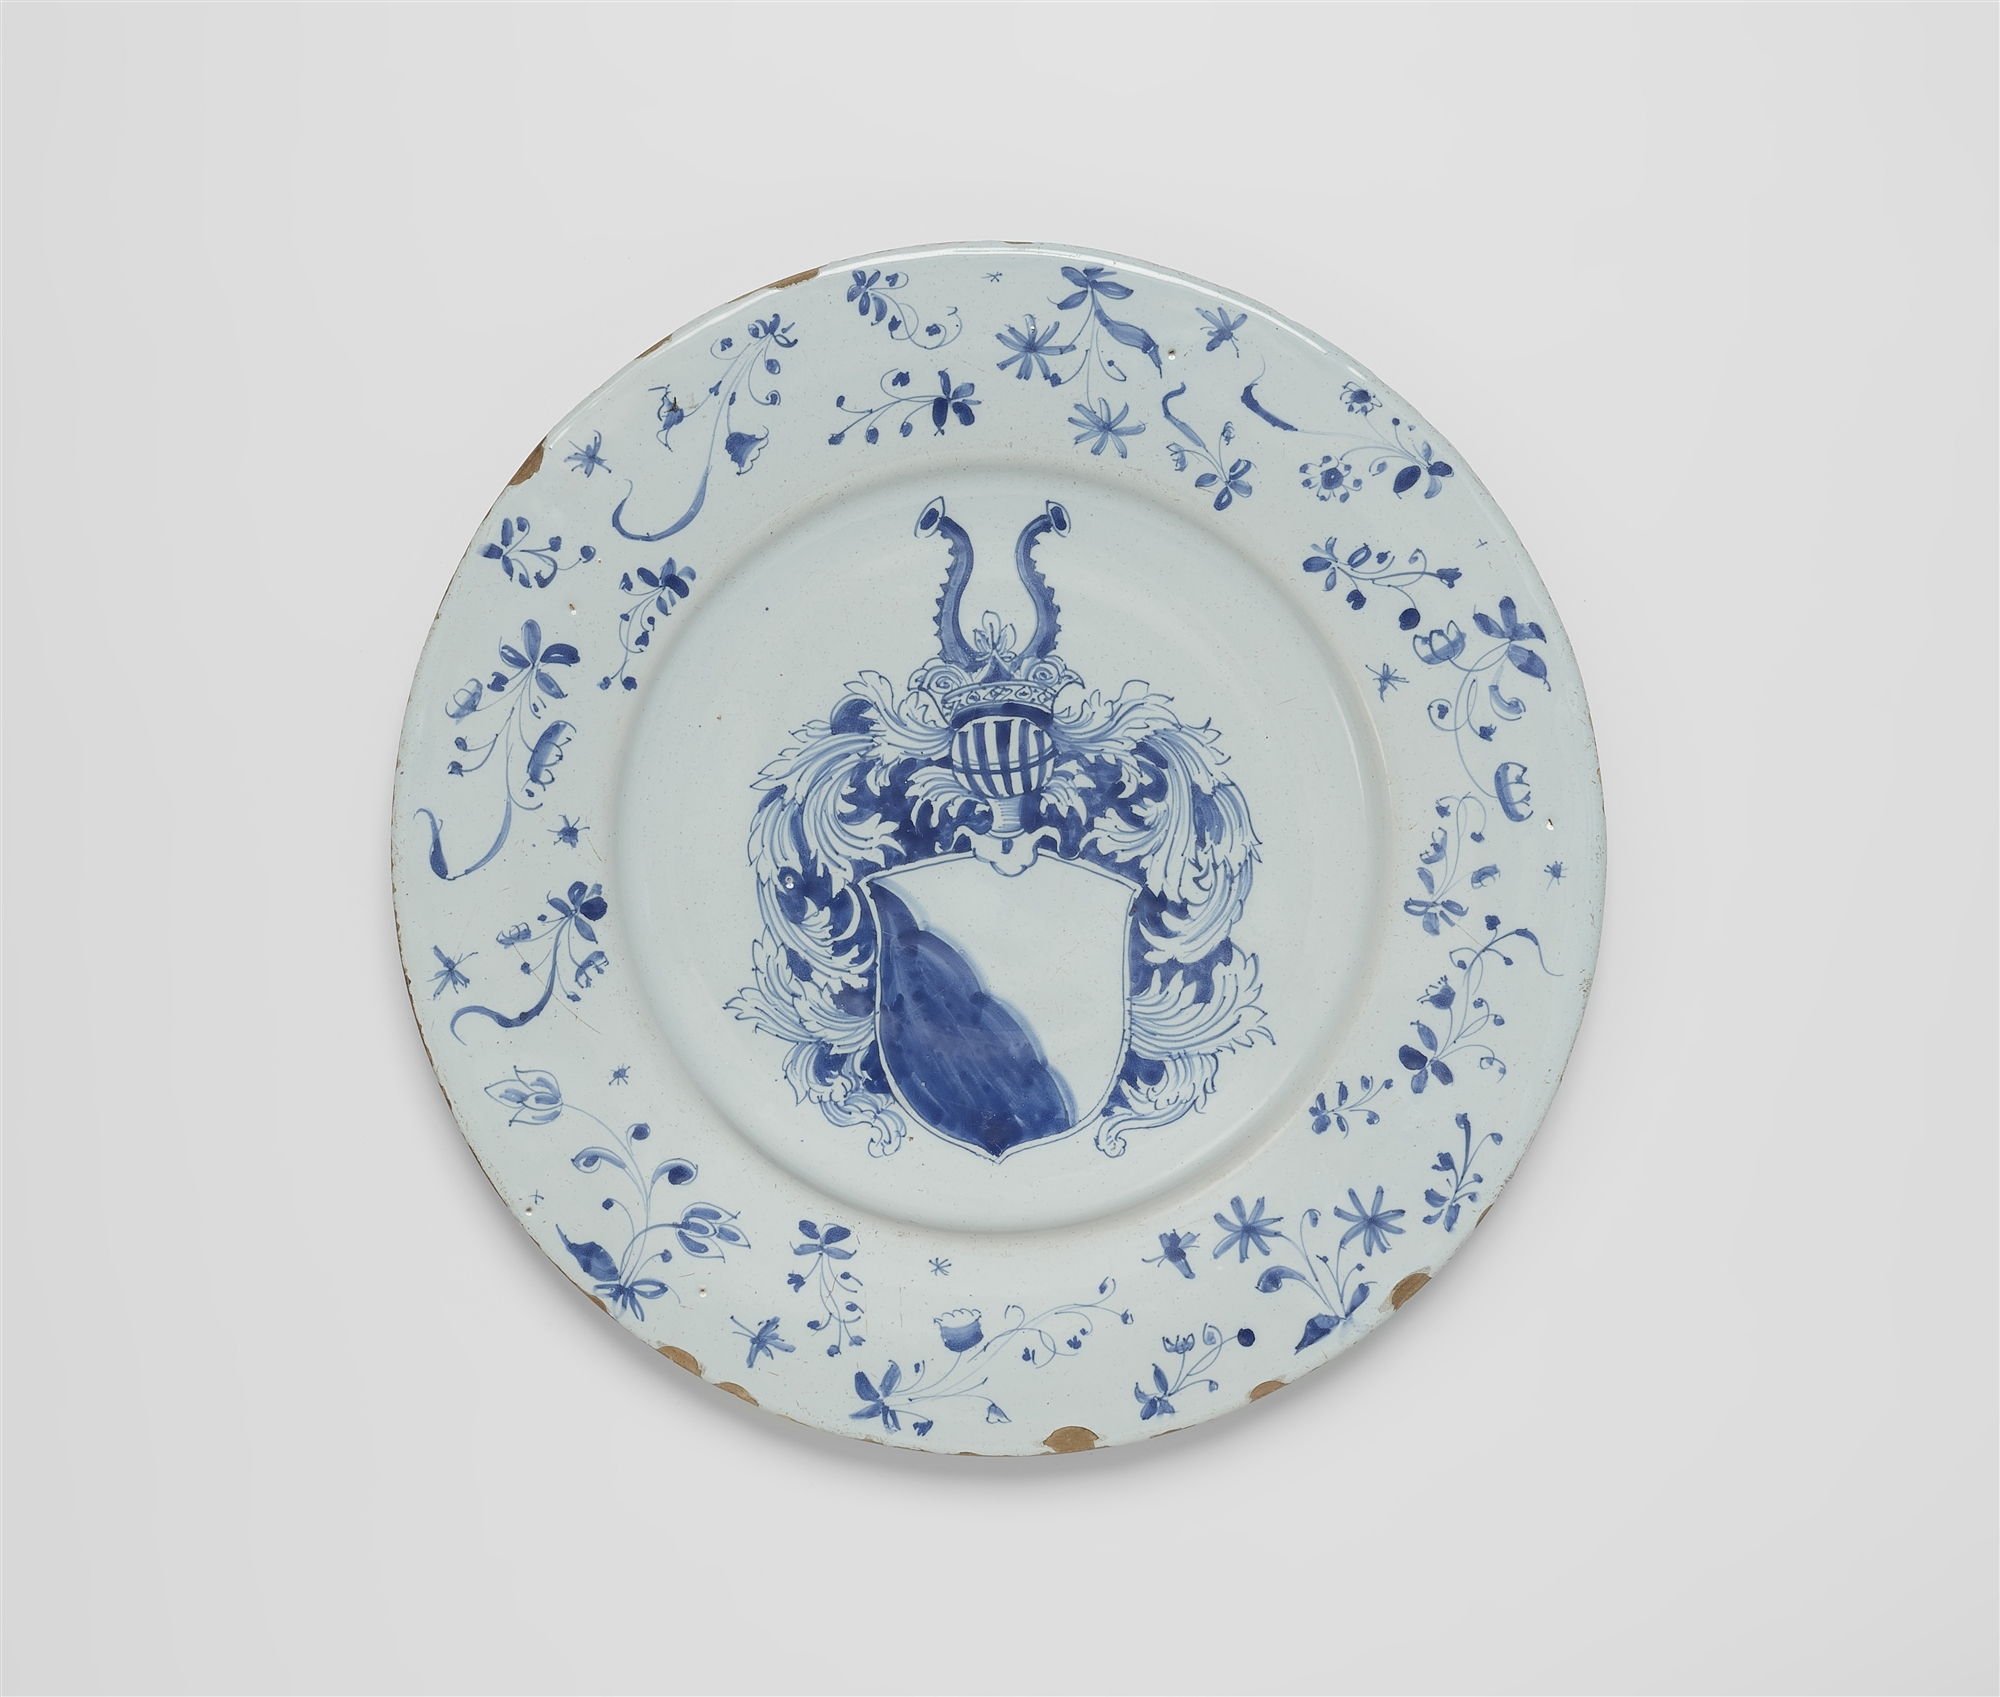 A faience plate with the coat of arms of the Höchstetter family